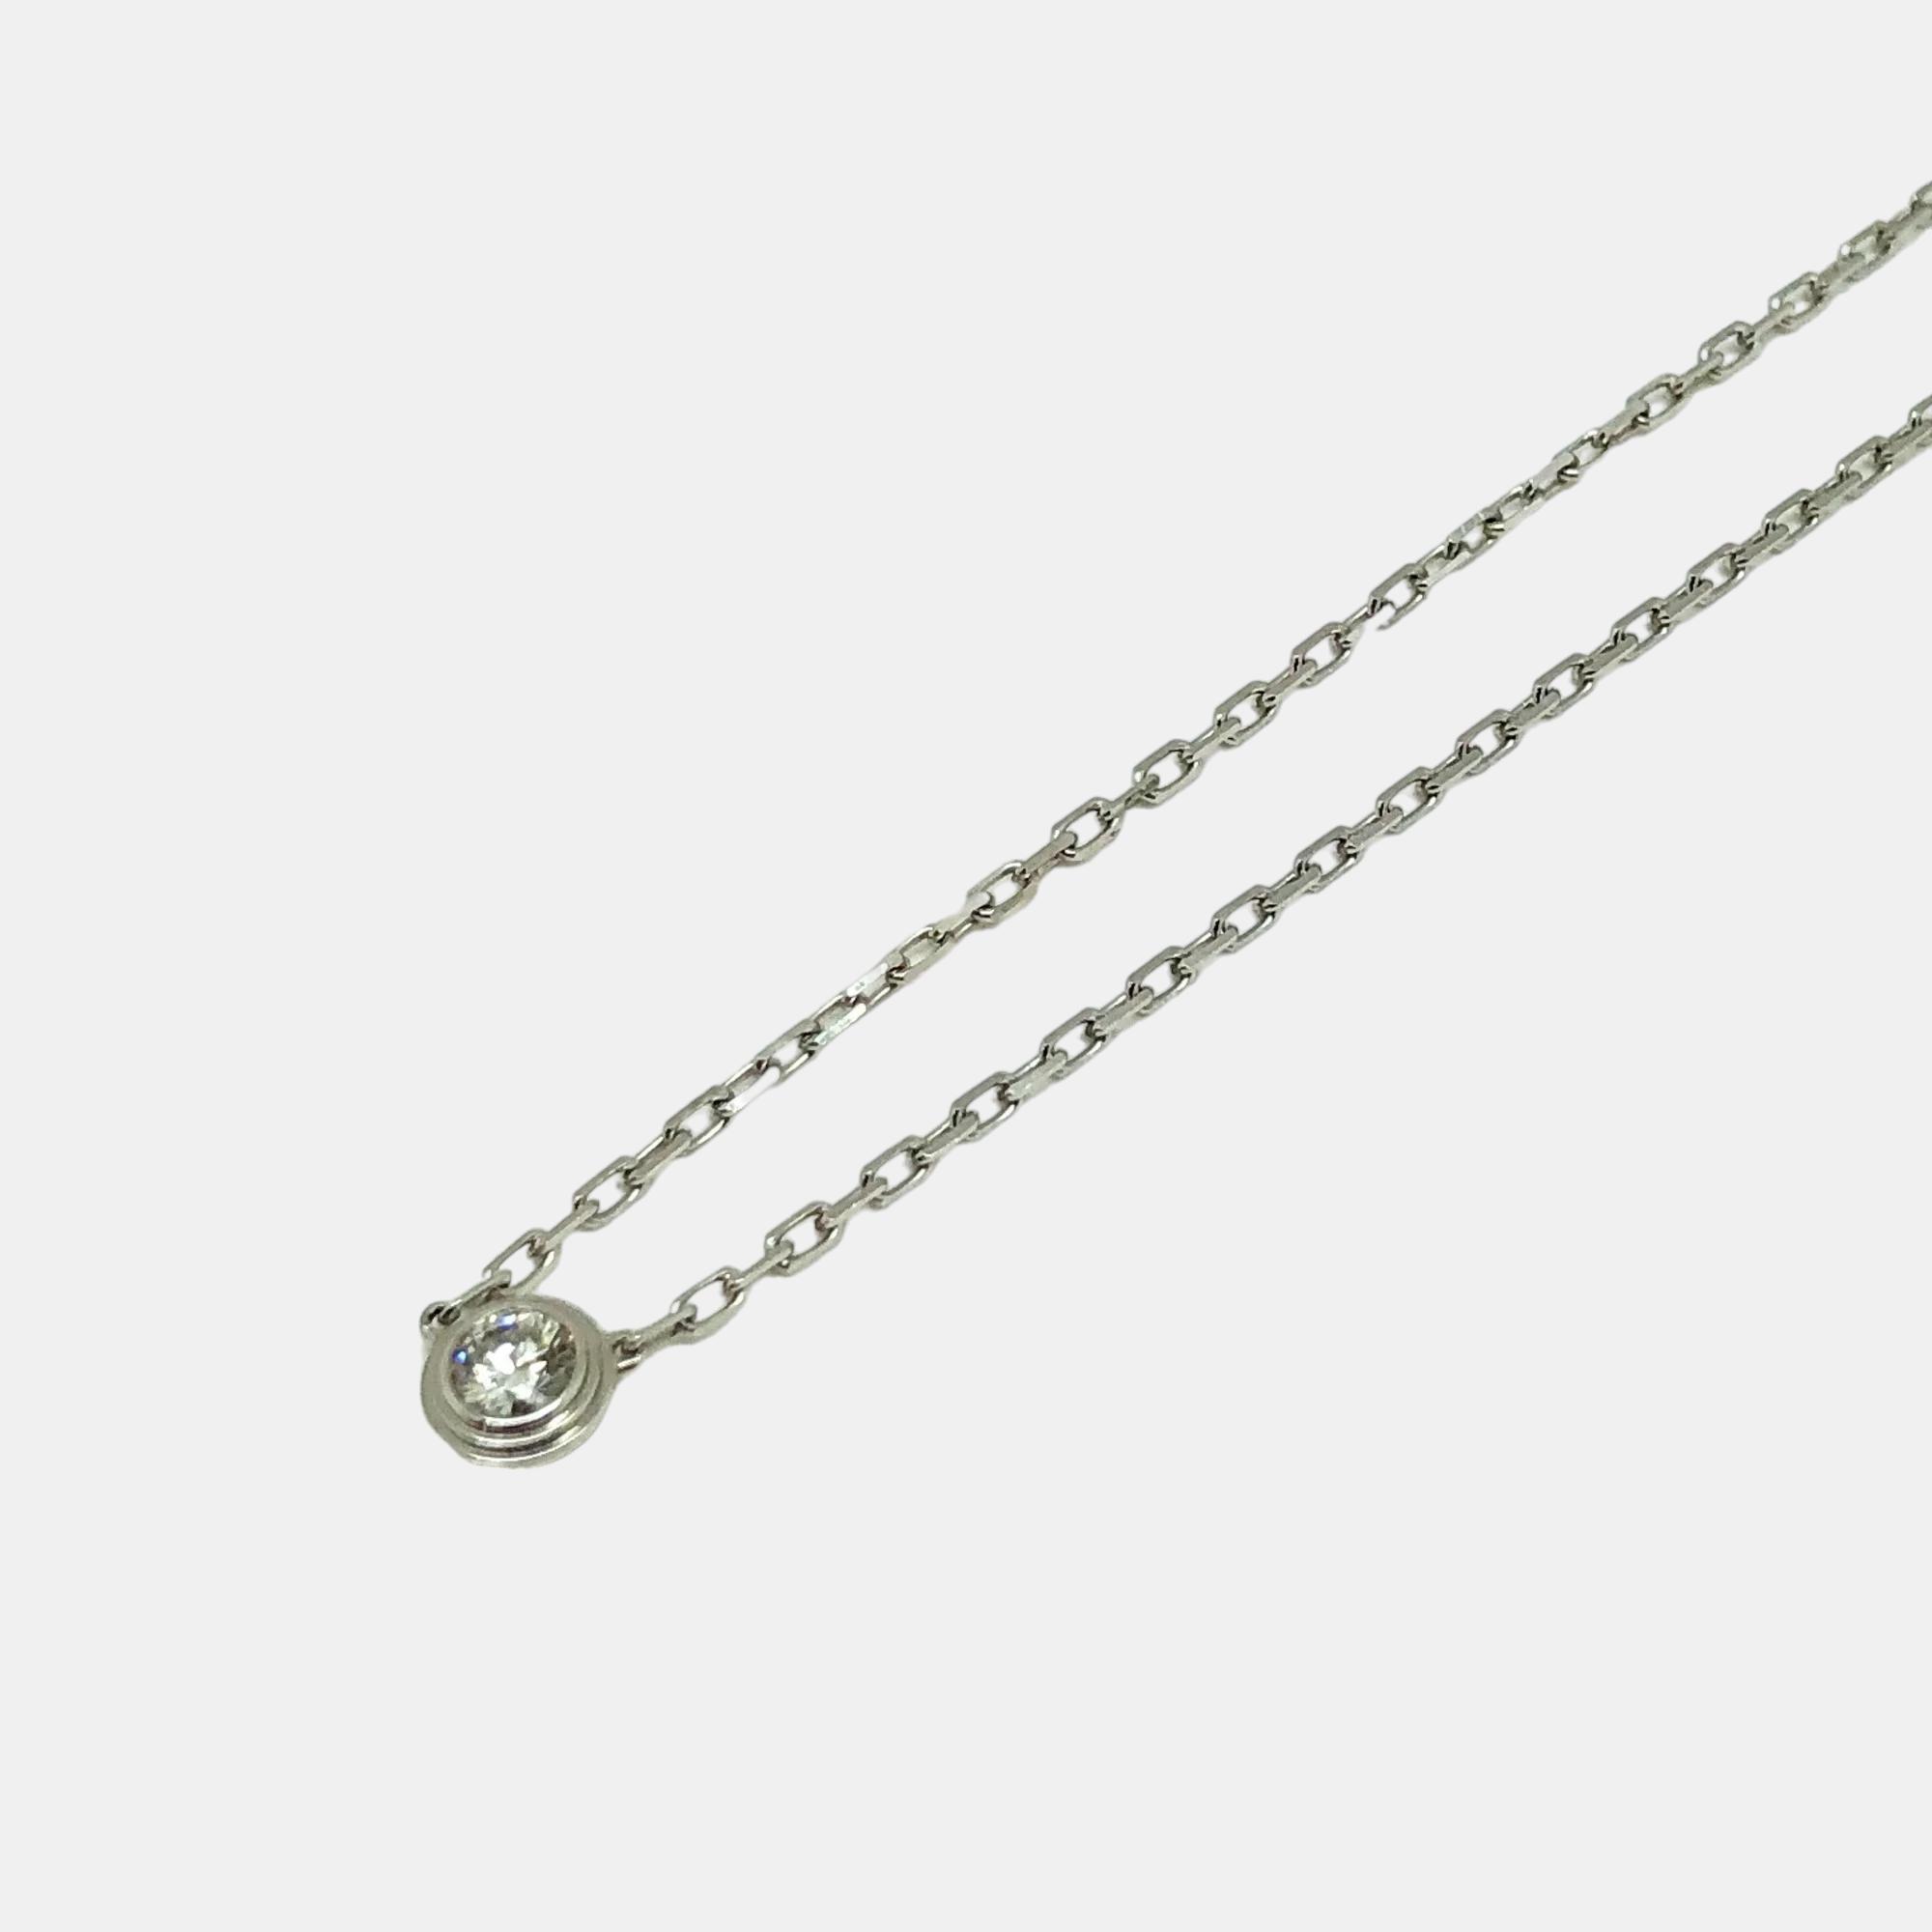 Discover the epitome of elegance with this Cartier necklace. Meticulously crafted with timeless design and artisanal excellence it encapsulates exclusivity. Elevate any outfit with a symbol of enduring value and exquisite craftsmanship.